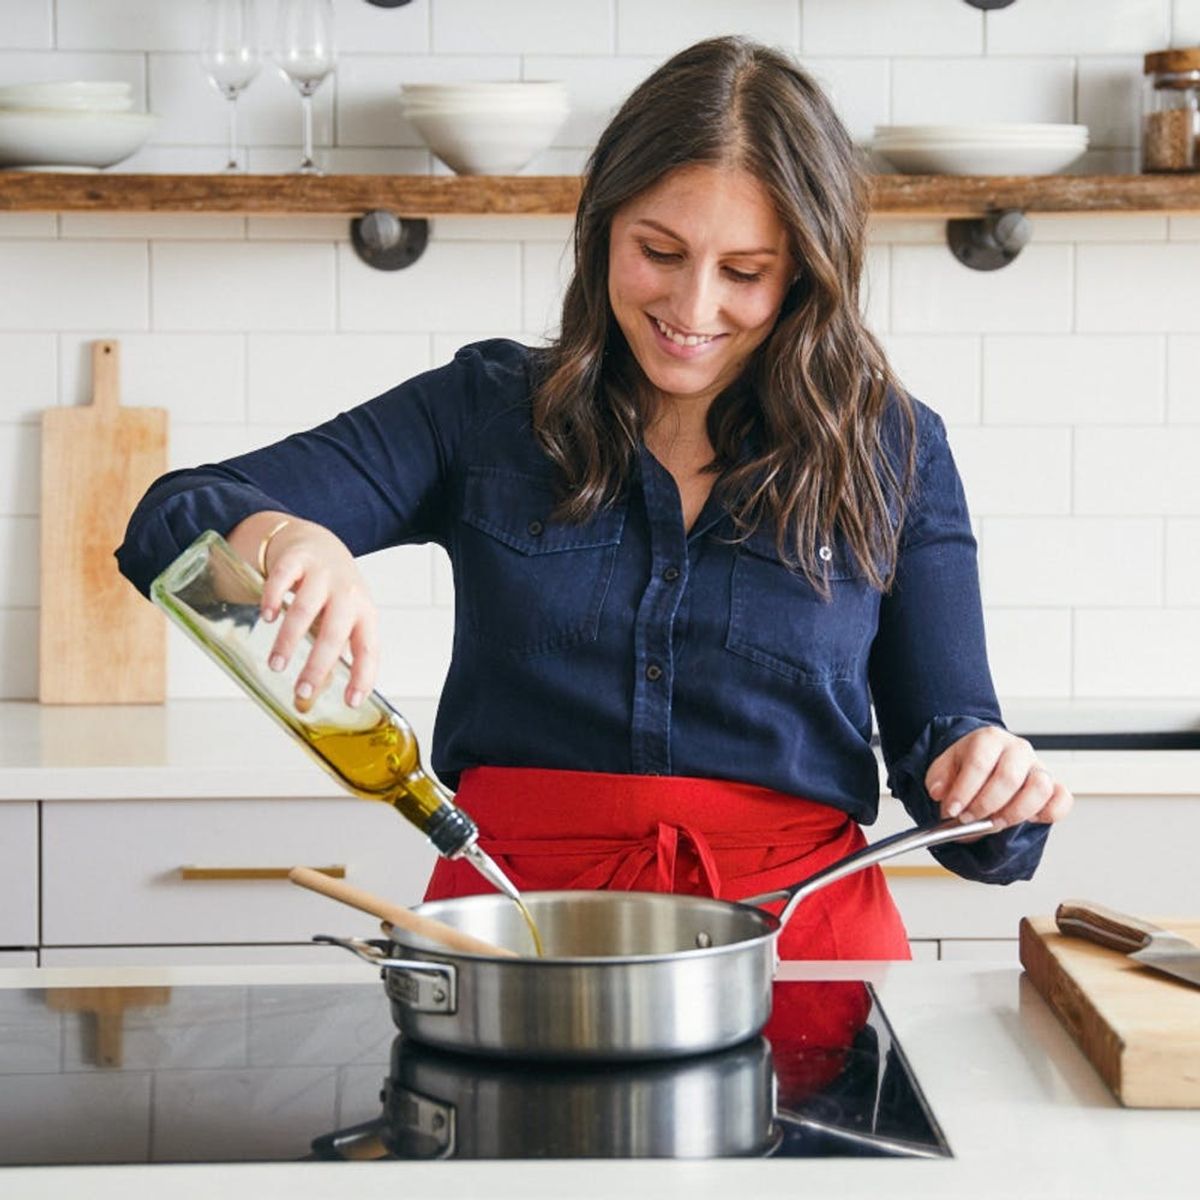 How Plated Is Making It Easier to Eat Better